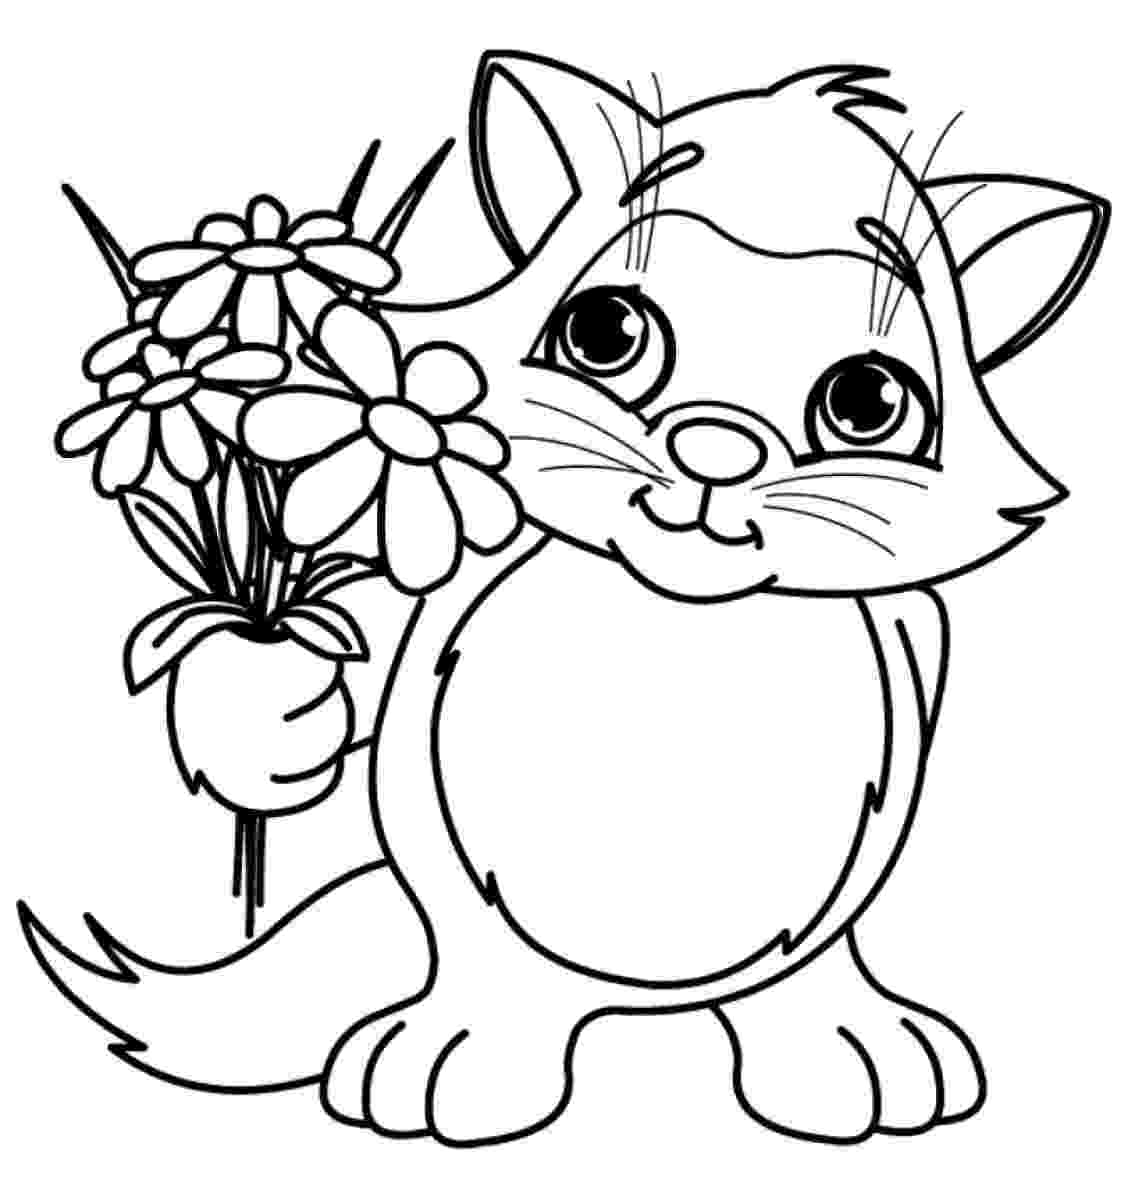 flower images to color free printable flower coloring pages for kids best images flower color to 